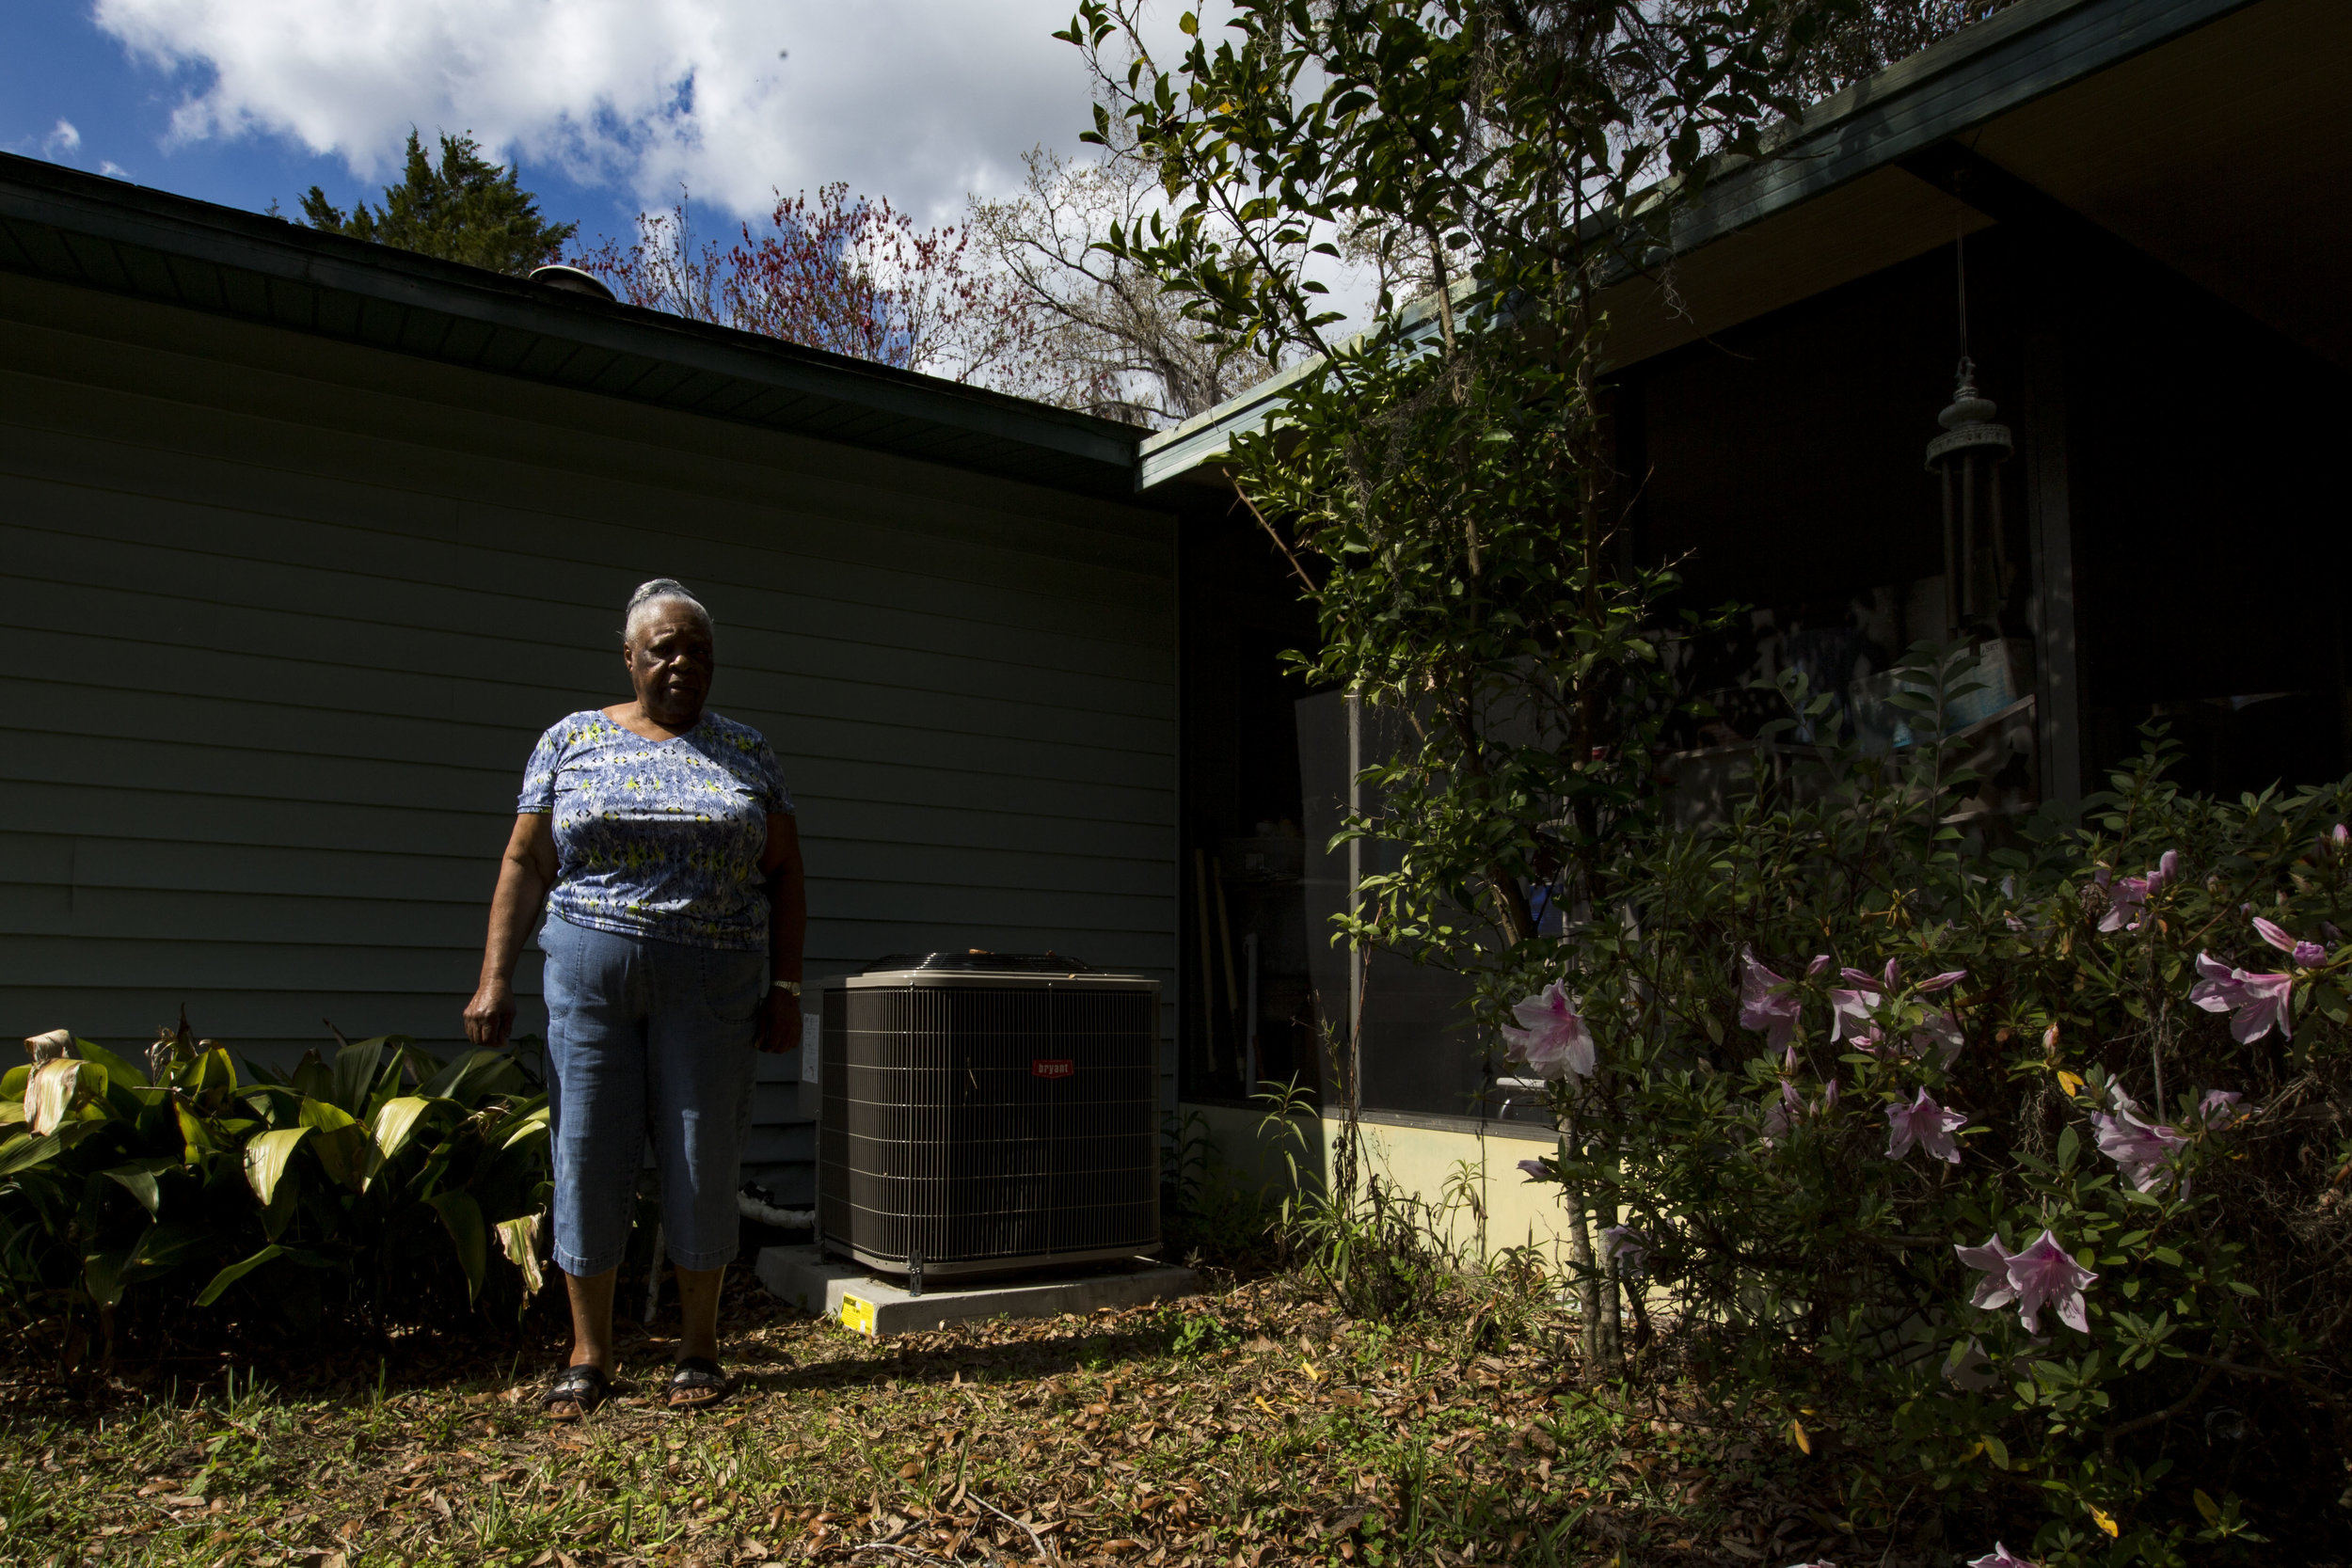  Fannie McCray poses for a portrait in her backyard in front of her new HVAC system on February 20, 2018. McCray was unaware the assessment was going to be attached to her property tax bill and is in jeopardy of losing her home.&nbsp; 